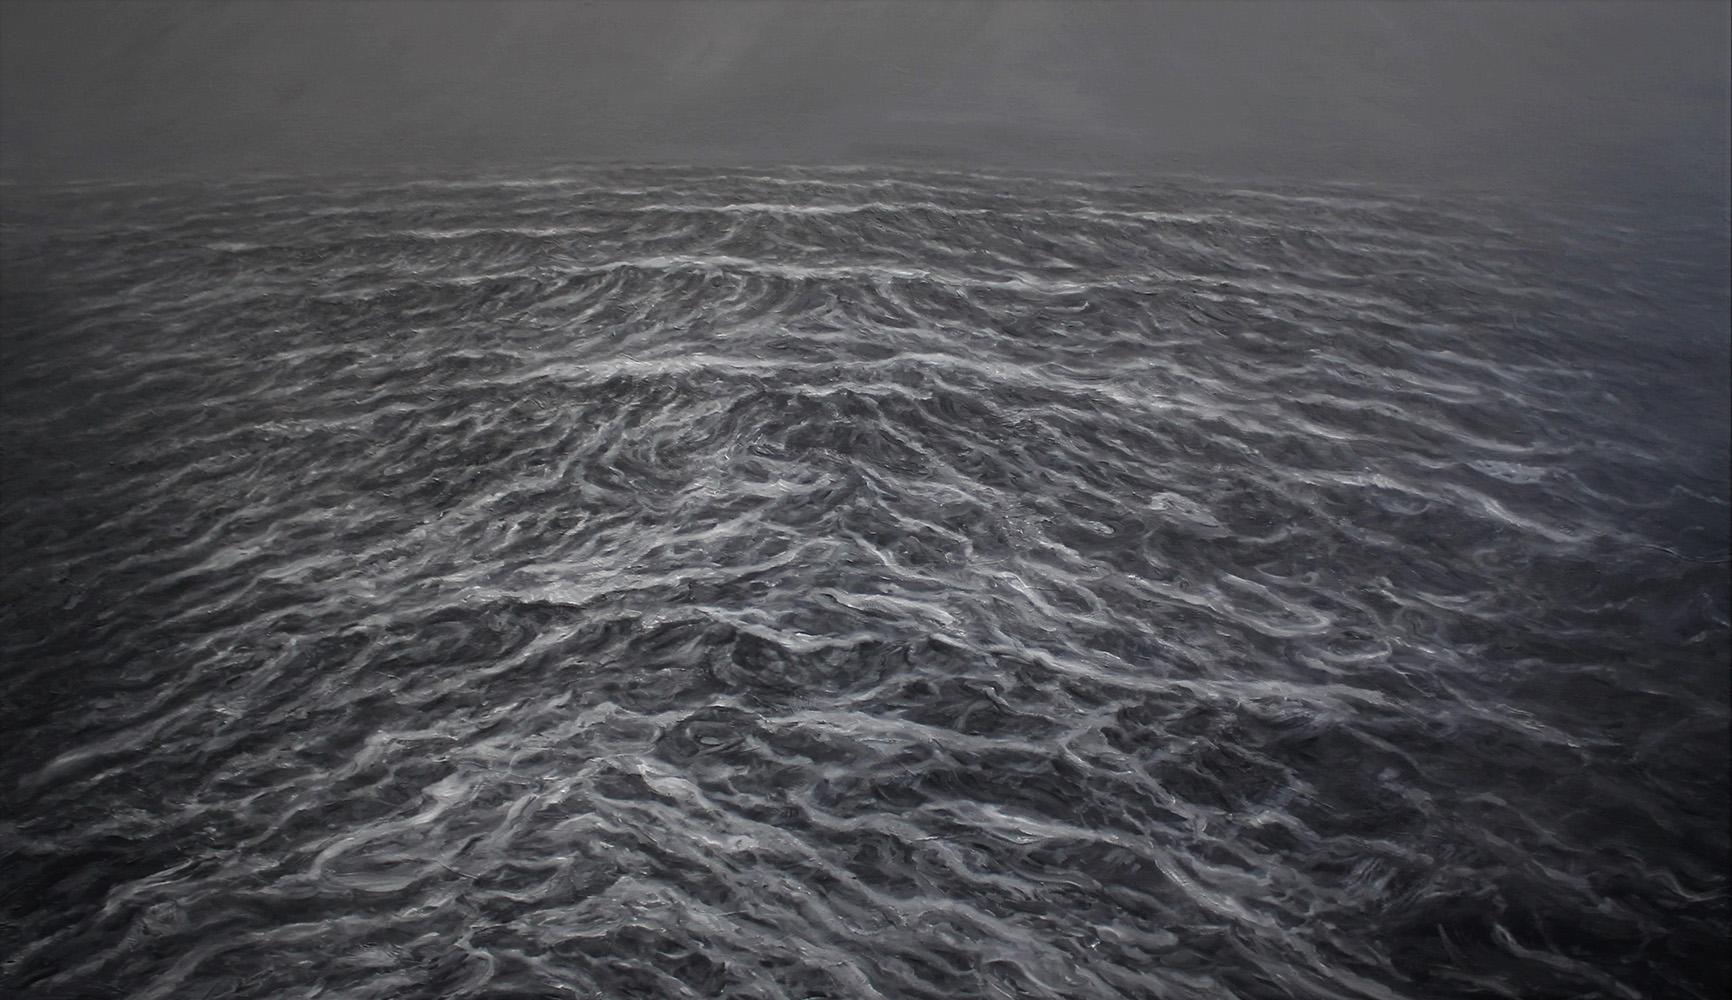 Black Sea is a unique oil on canvas painting by contemporary artist Franco Salas Borquez, dimensions are 97 × 162 cm (38.2 × 63.8 in).
The artwork is signed, sold unframed and comes with a certificate of authenticity.

Franco Salas Borquez has a